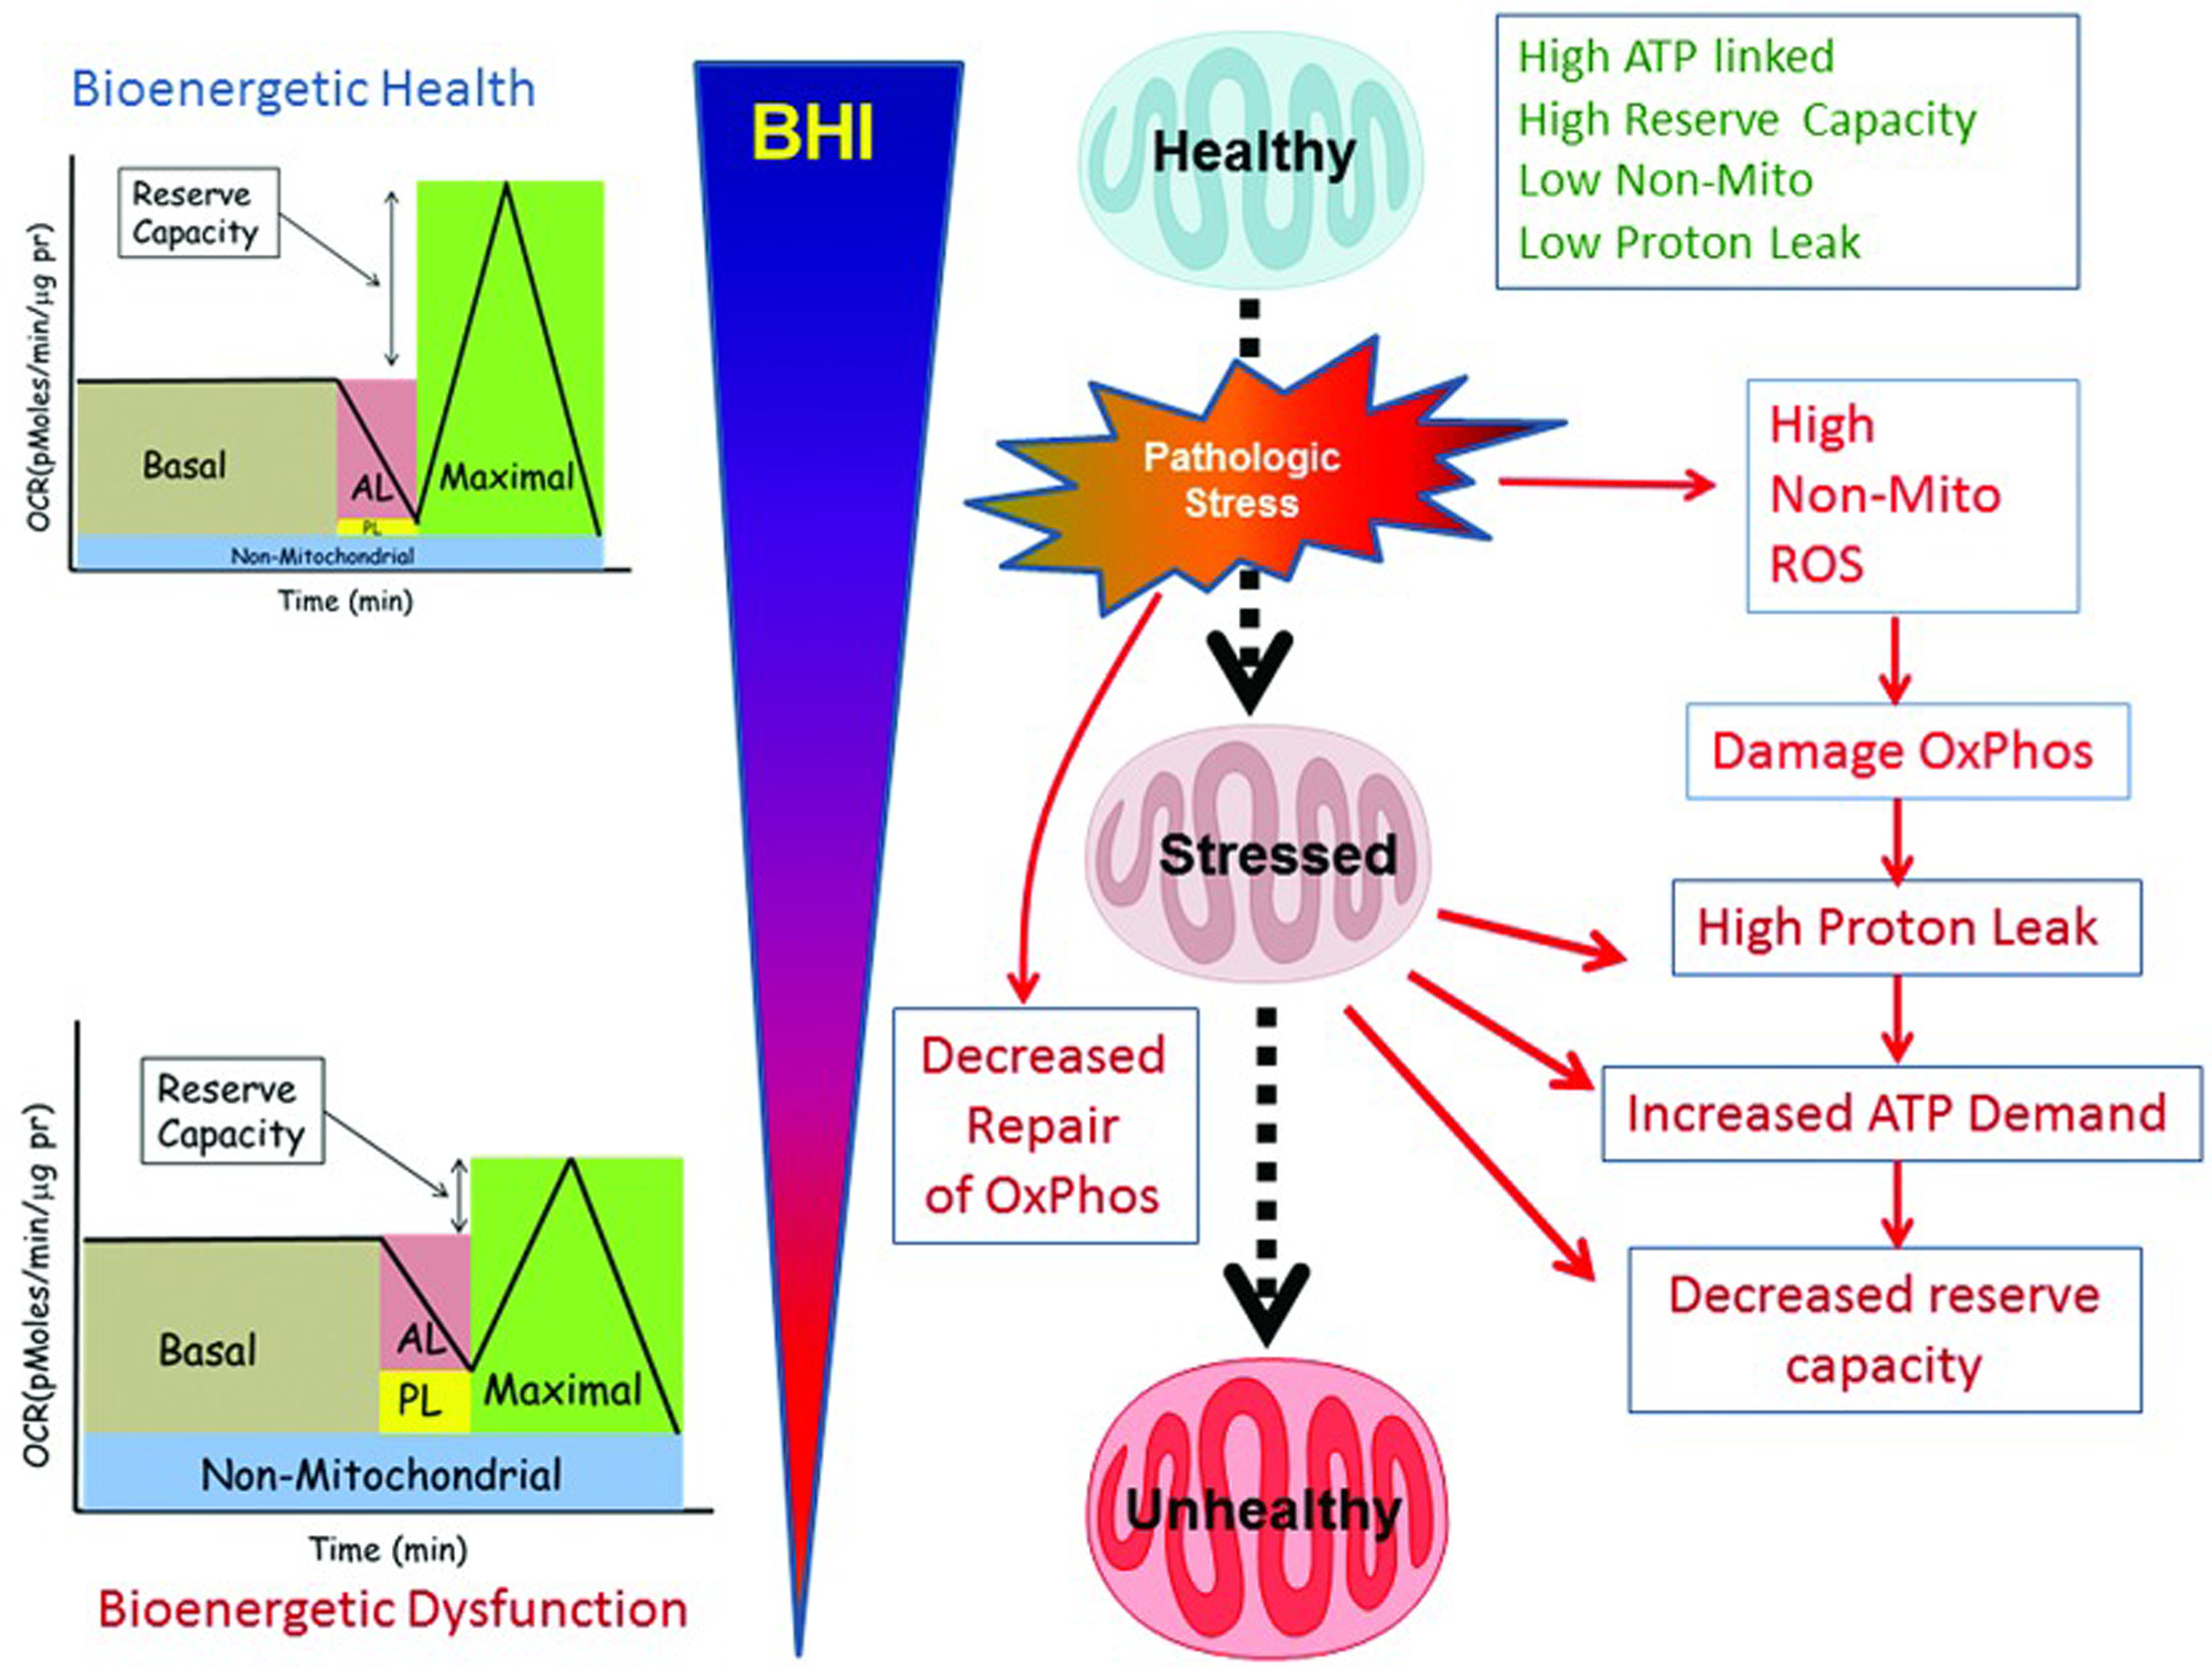 BHI as a dynamic measure of the response of the body to stress. Source: Chacko BK, Kramer PA, Ravi S, et al. The Bioenergetic Health Index: A new concept in mitochondrial translational research. Clin Sci (Lond). 2014;127(pt 6):367-373. Available at http://www.clinsci.org/content/127/6/367/.